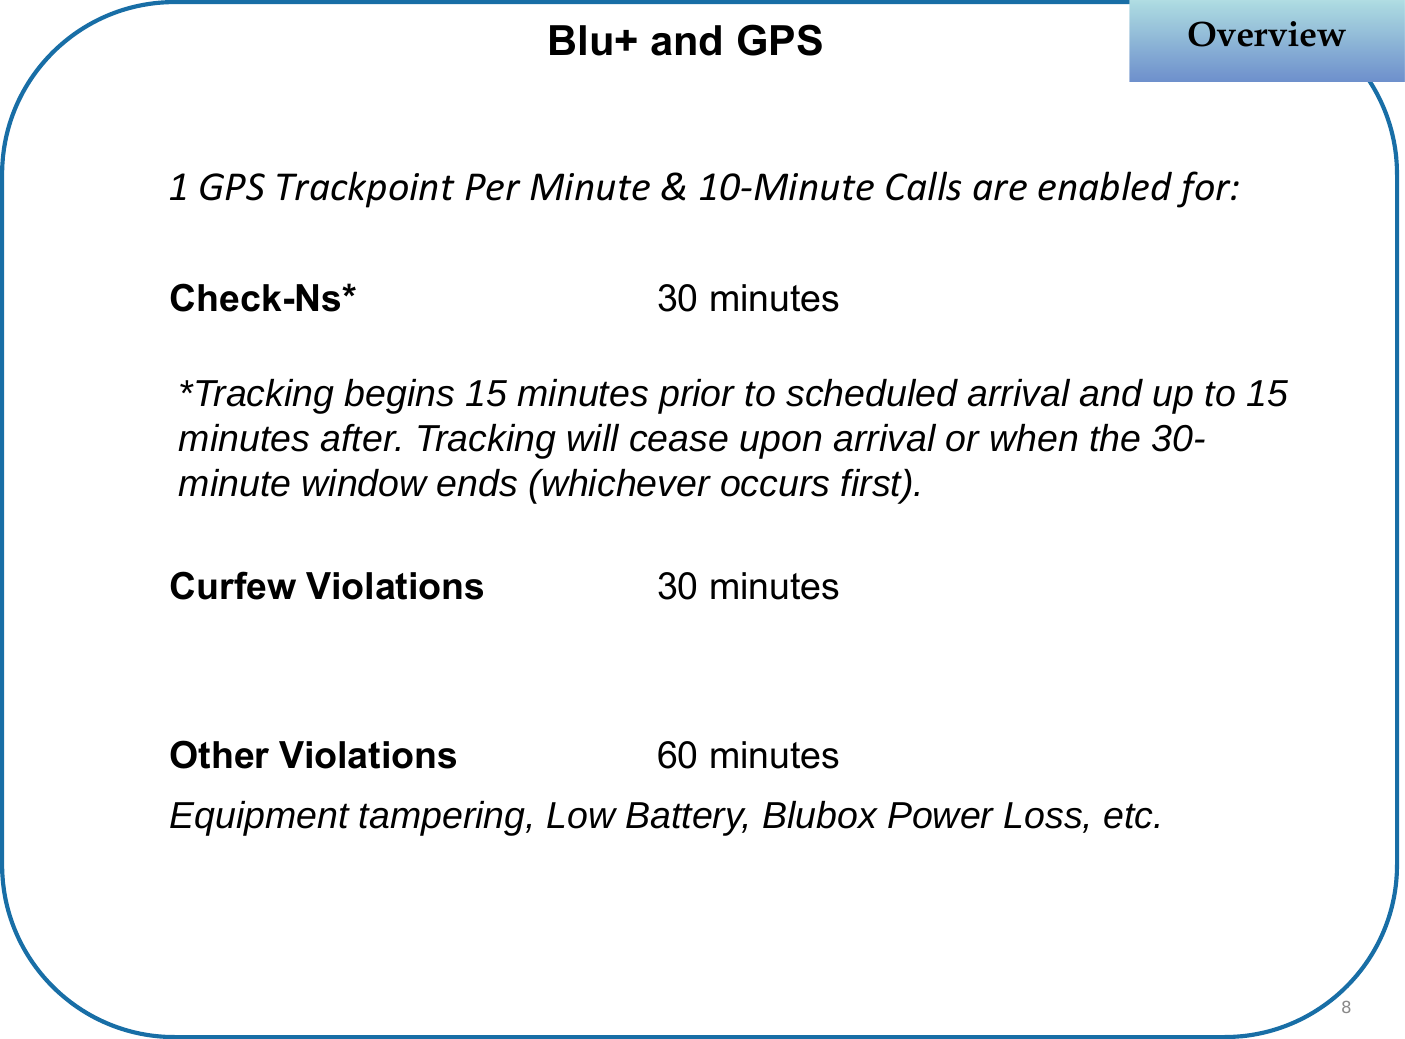 1GPSTrackpointPerMinute&amp;10‐MinuteCallsareenabledfor:OverviewOverviewBlu+ and GPS8Check-Ns* 30 minutes*Tracking begins 15 minutes prior to scheduled arrival and up to 15 minutes after. Tracking will cease upon arrival or when the 30-minute window ends (whichever occurs first).Curfew Violations 30 minutesOther Violations 60 minutesEquipment tampering, Low Battery, Blubox Power Loss, etc.